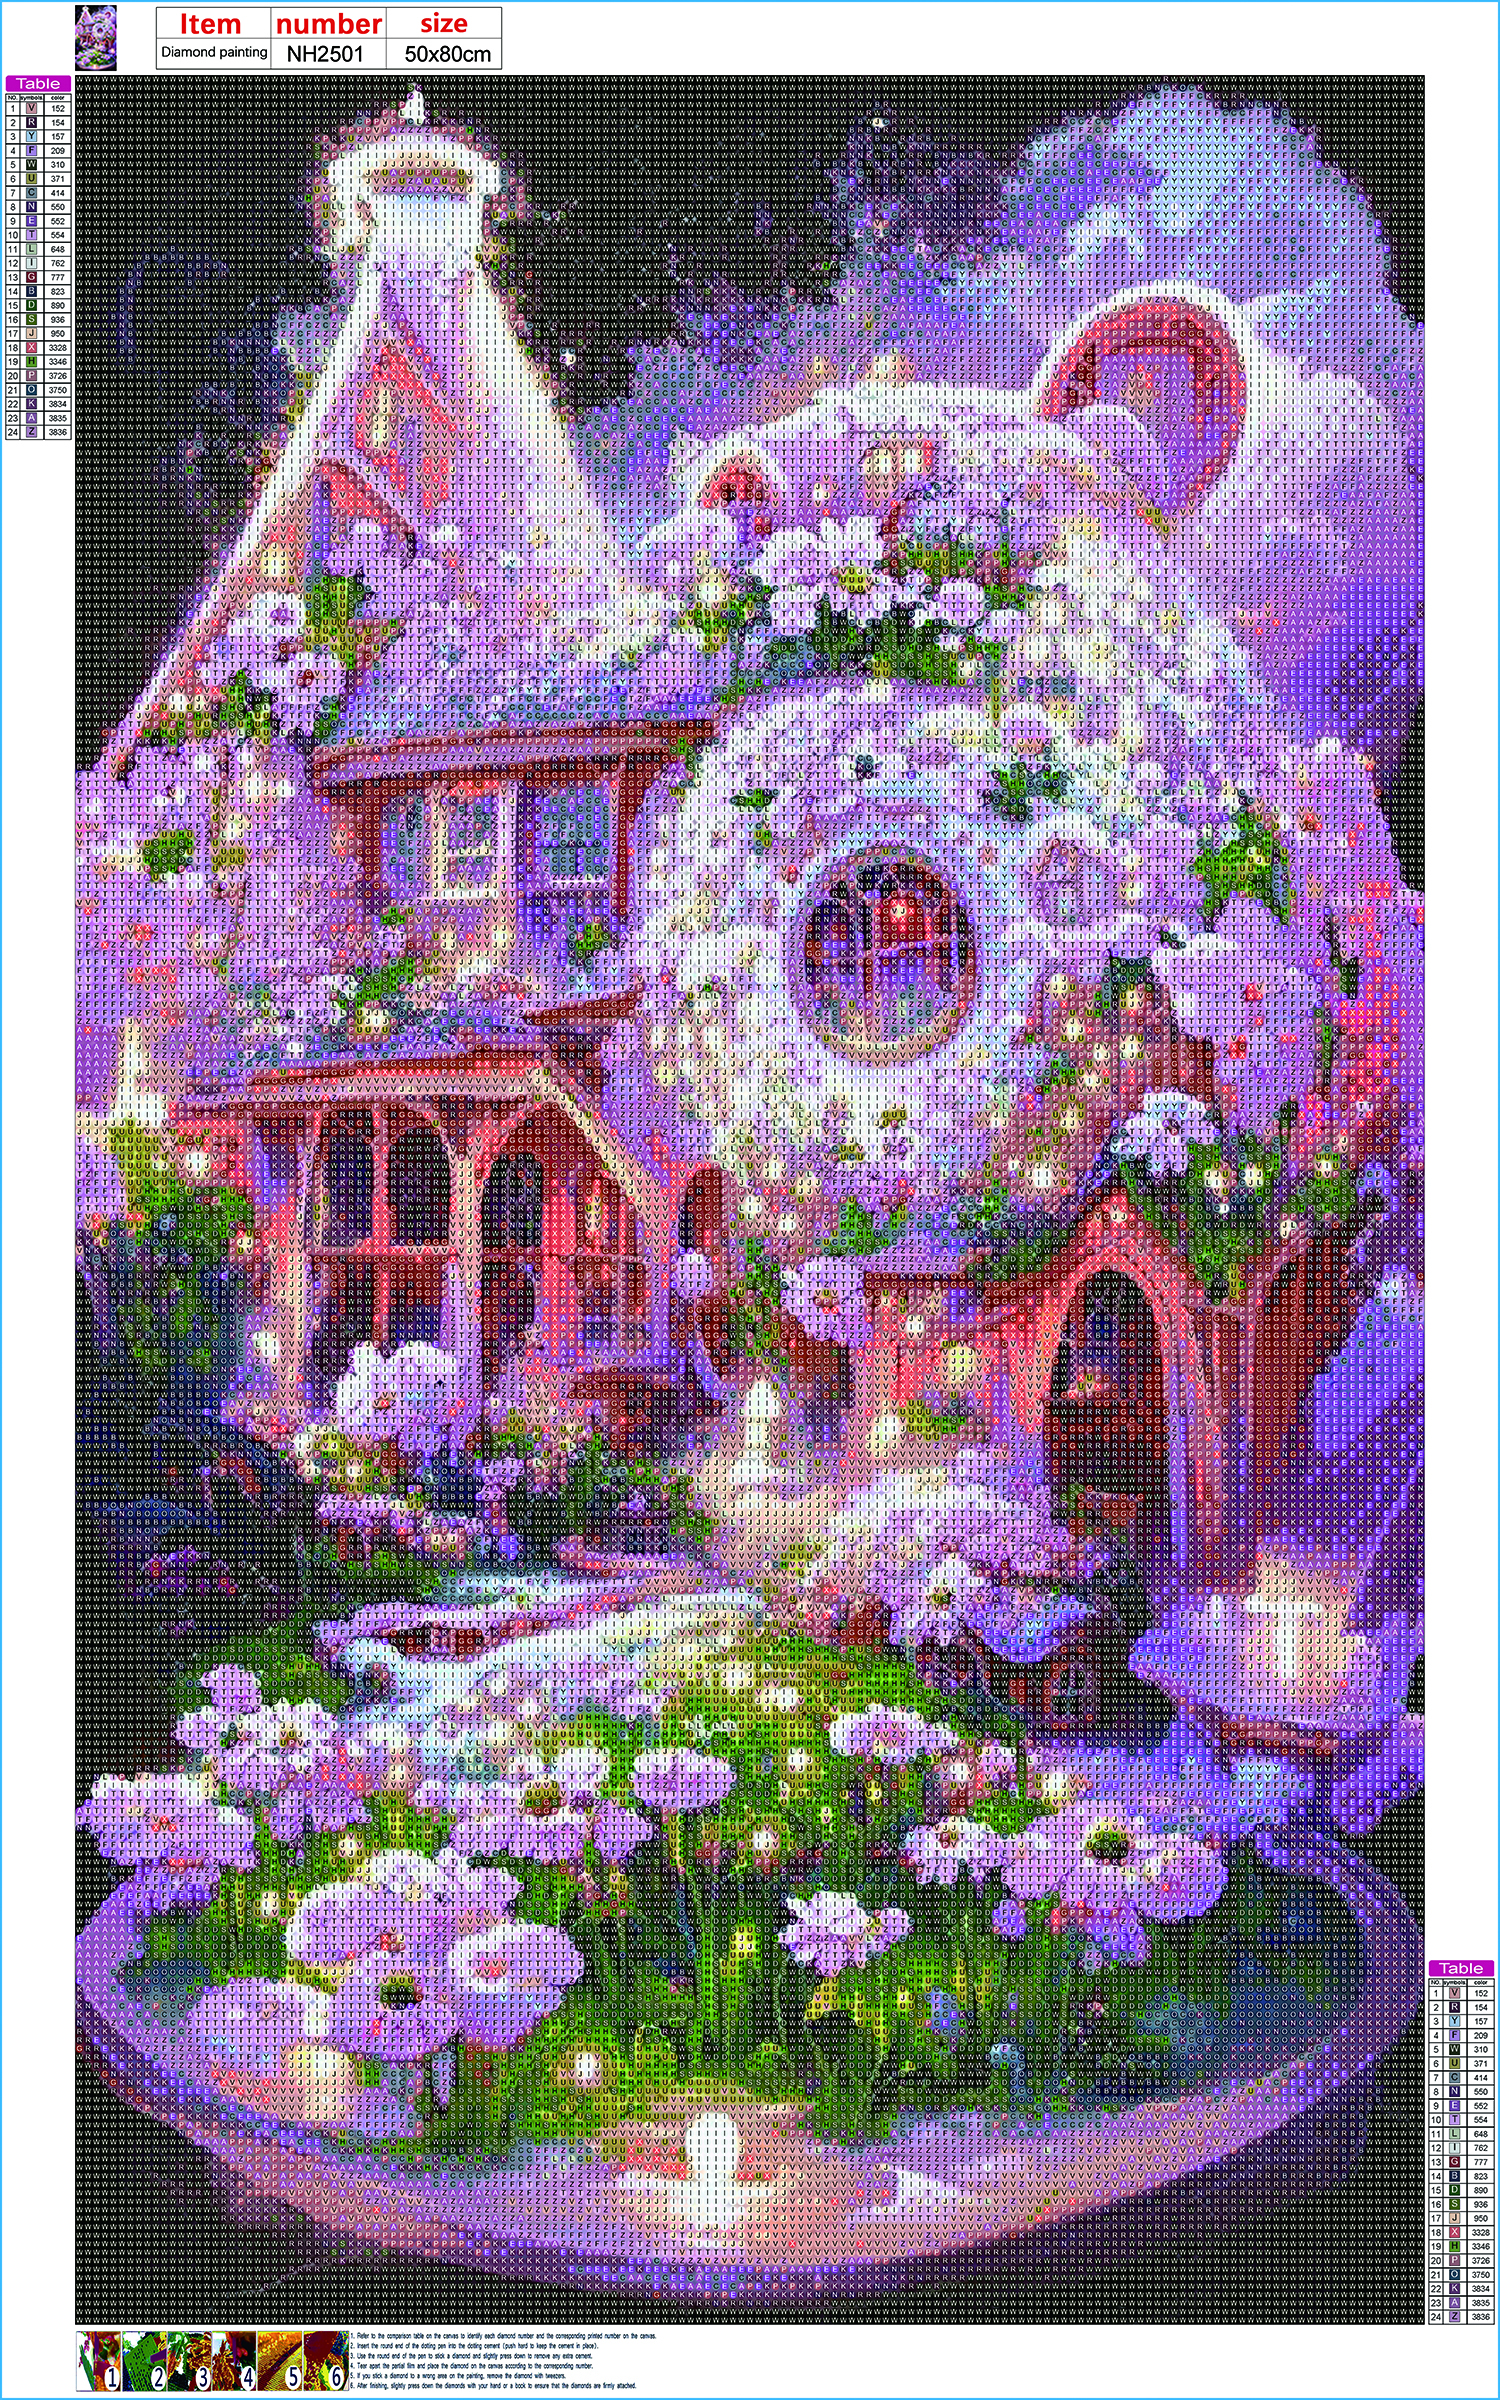 Pink House Flower 50*80cm(canvas) full round drill(24 and 43 colors version) diamond painting